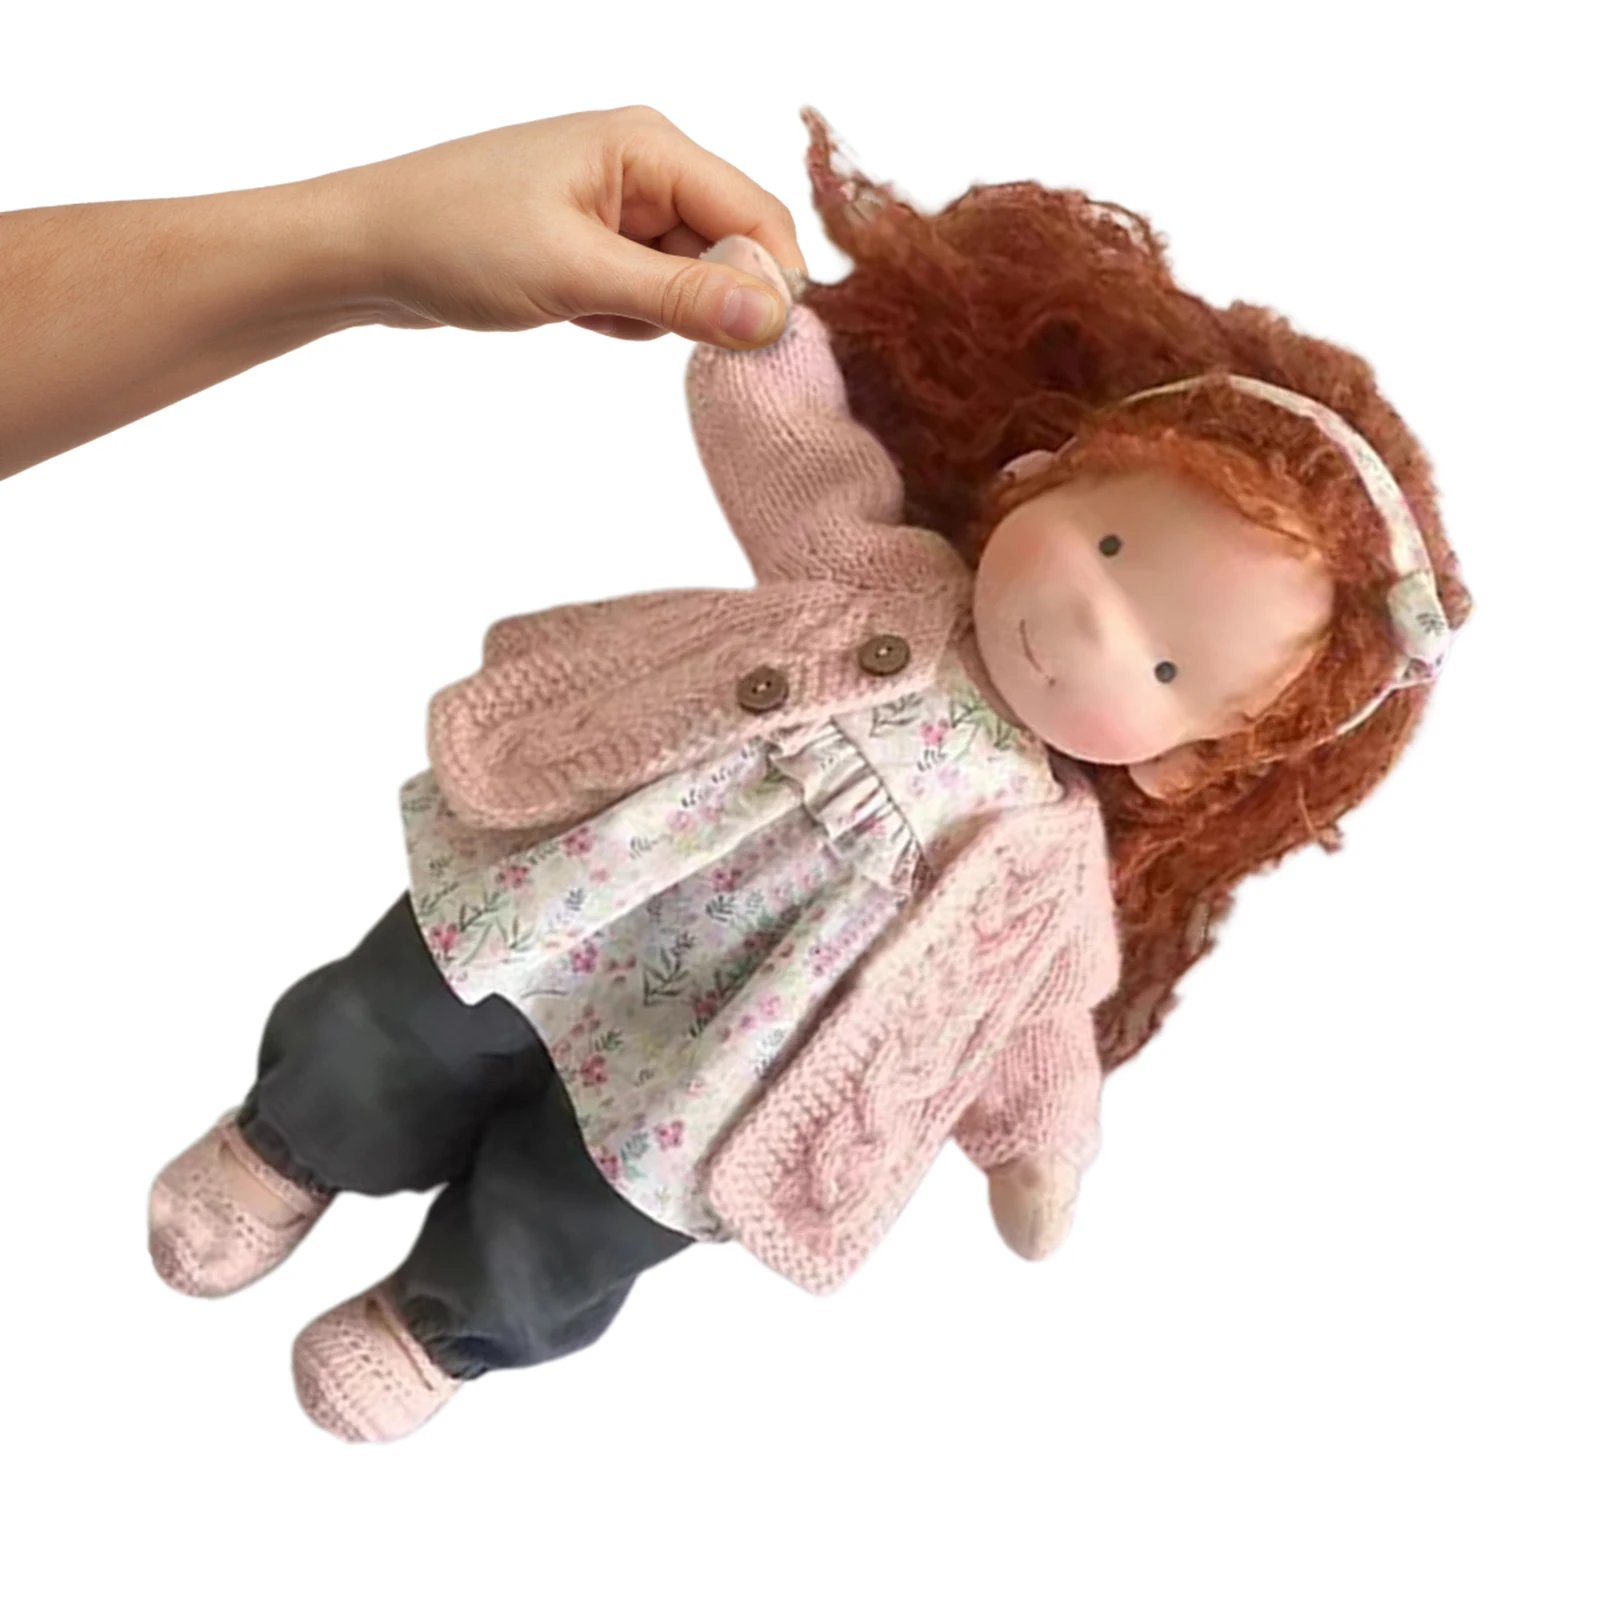 

Plush Stuffed Doll 12 Baby Doll For Girls Soft Plush Rag Doll Sleeping Cuddle Buddy For Toddlers Infants And Babies